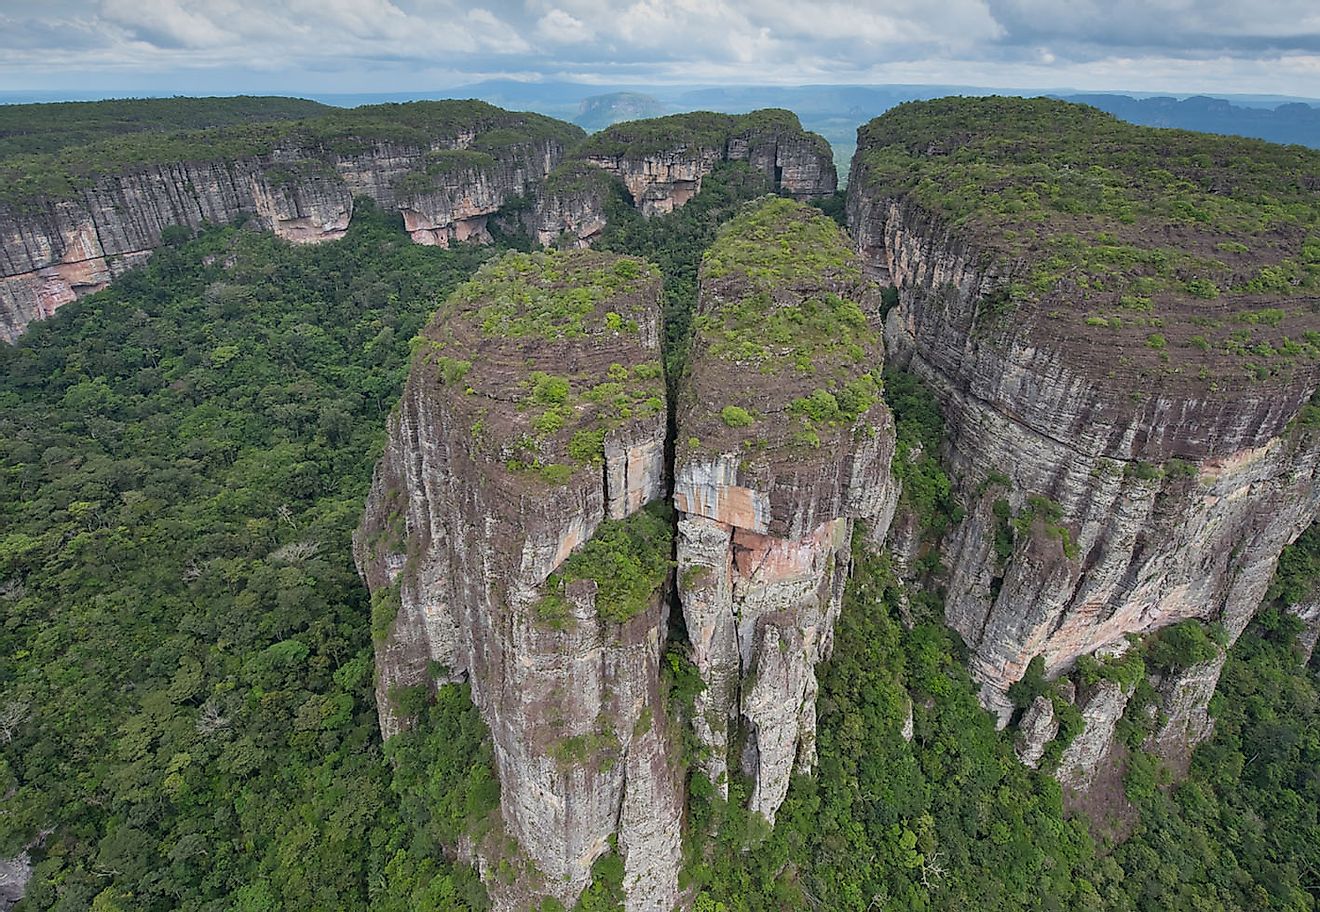 The Maloca of the Jaguar in Colombia is a natural wonder. Image credit: thecitypaperbogota.com